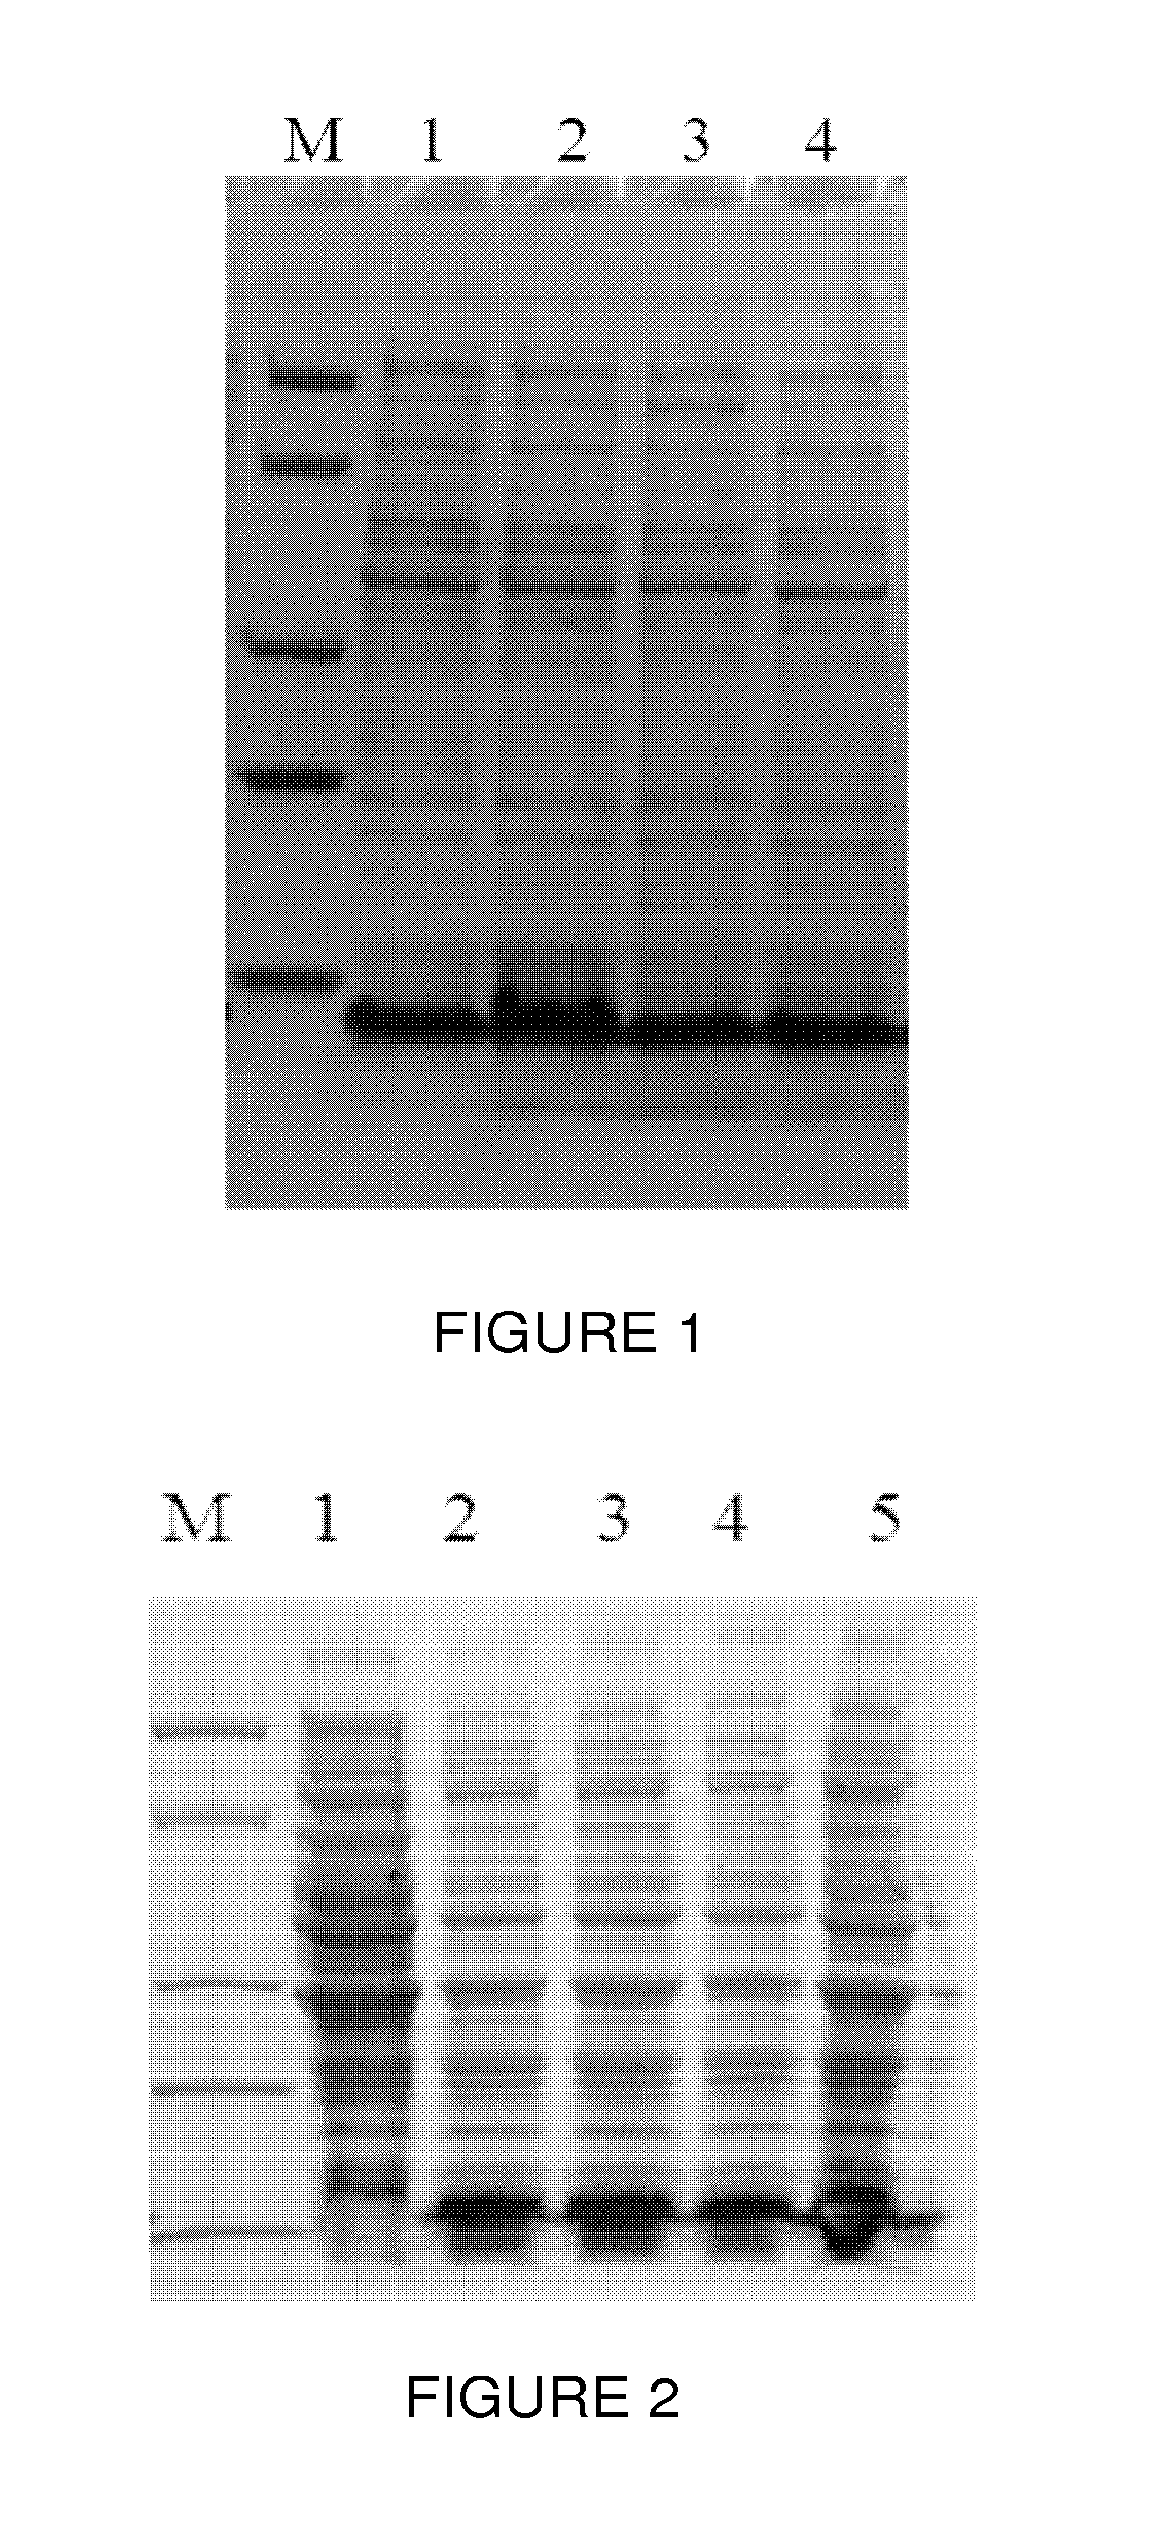 Protein a mutants having high alkali resistance and methods of use thereof